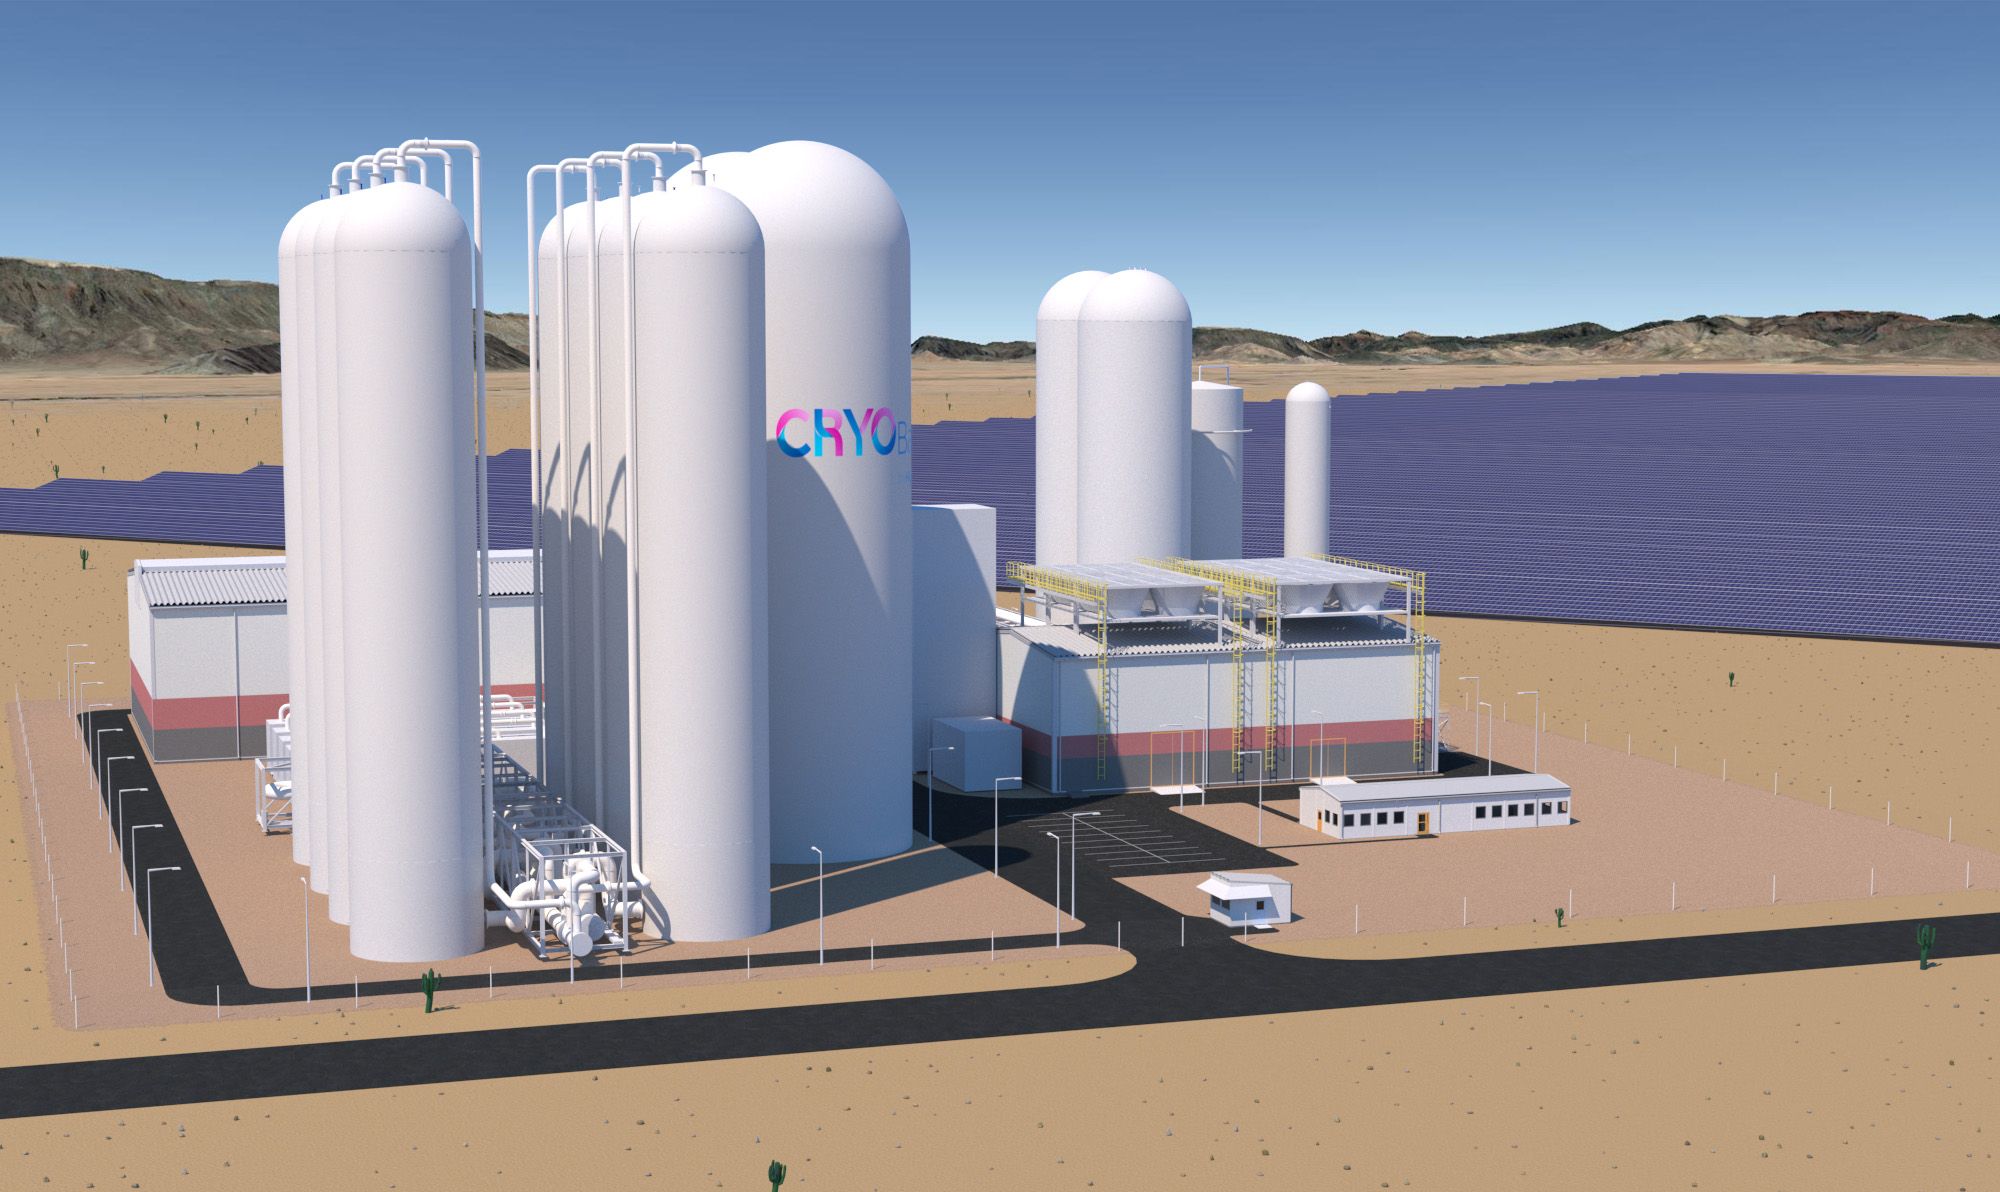 Highview Enlasa, the 50/50 joint venture between Highview Power, a global leader in long duration energy storage solutions, and Energía Latina S.A.-E